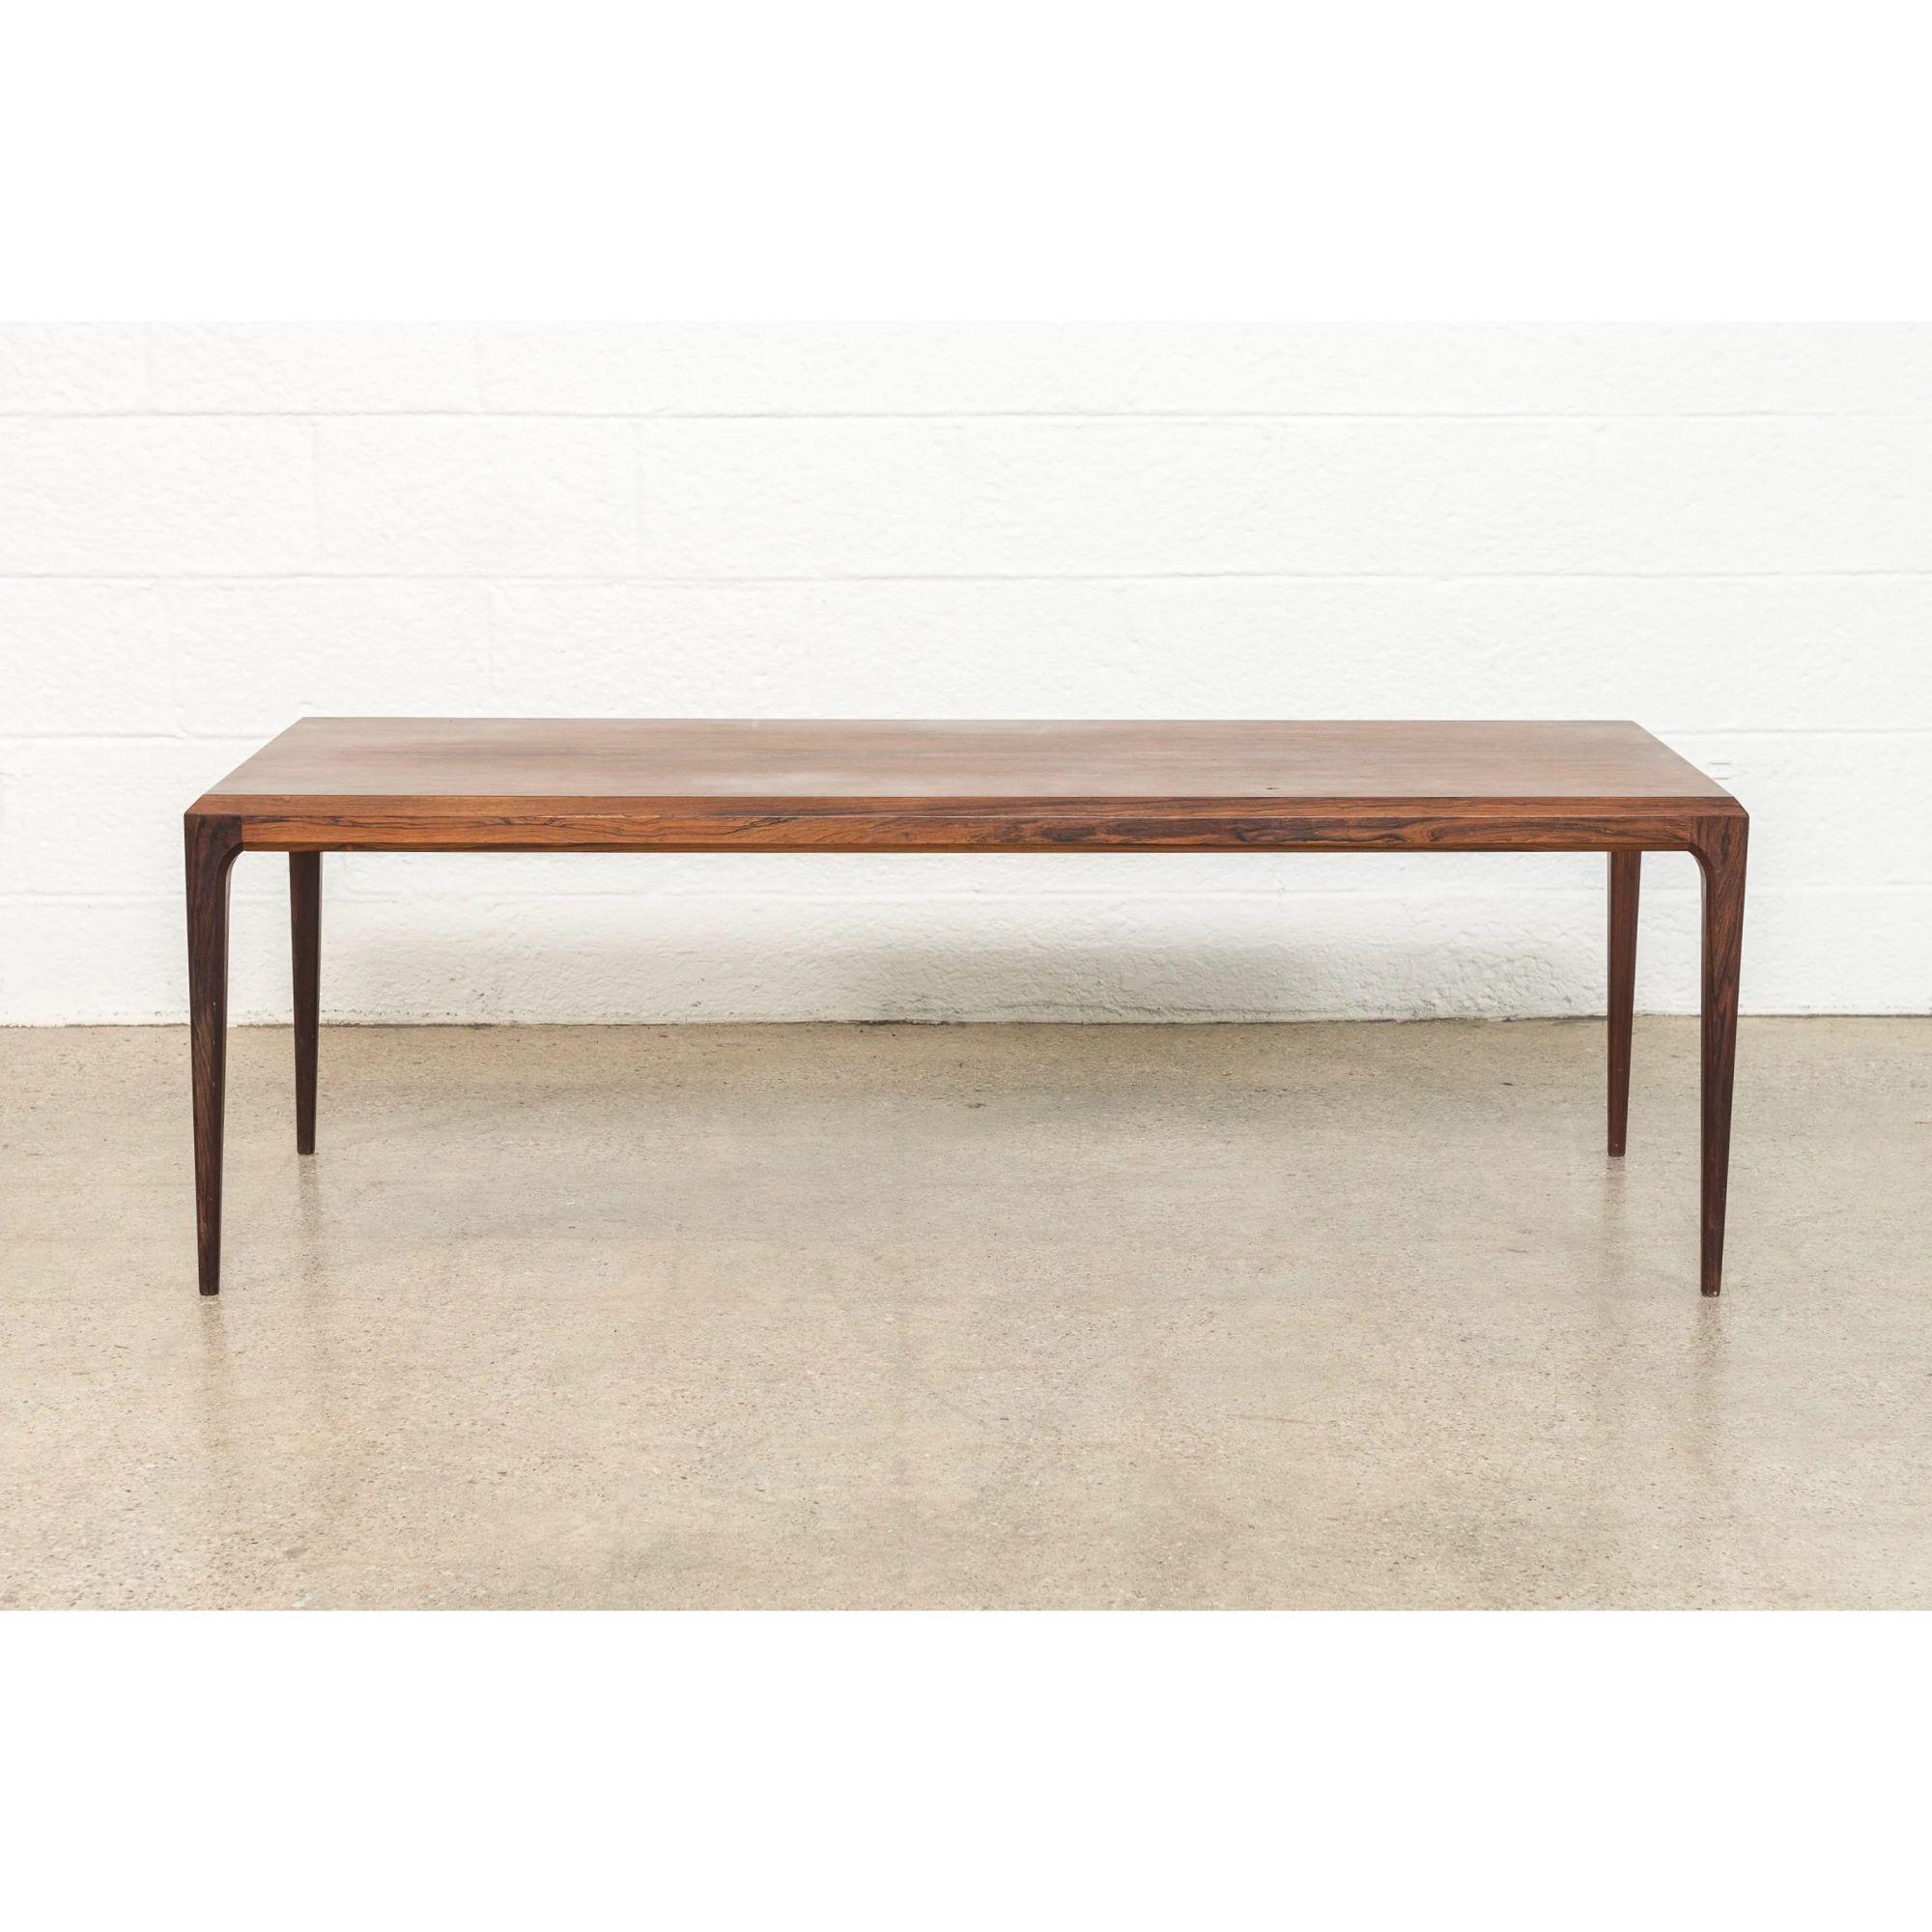 This exquisite Danish modern rosewood coffee table was designed by Johannes Andersen for CFC Silkeborg and made in Denmark circa 1960. The classic minimalist design features clean, elegant lines and the table is expertly crafted from solid rosewood